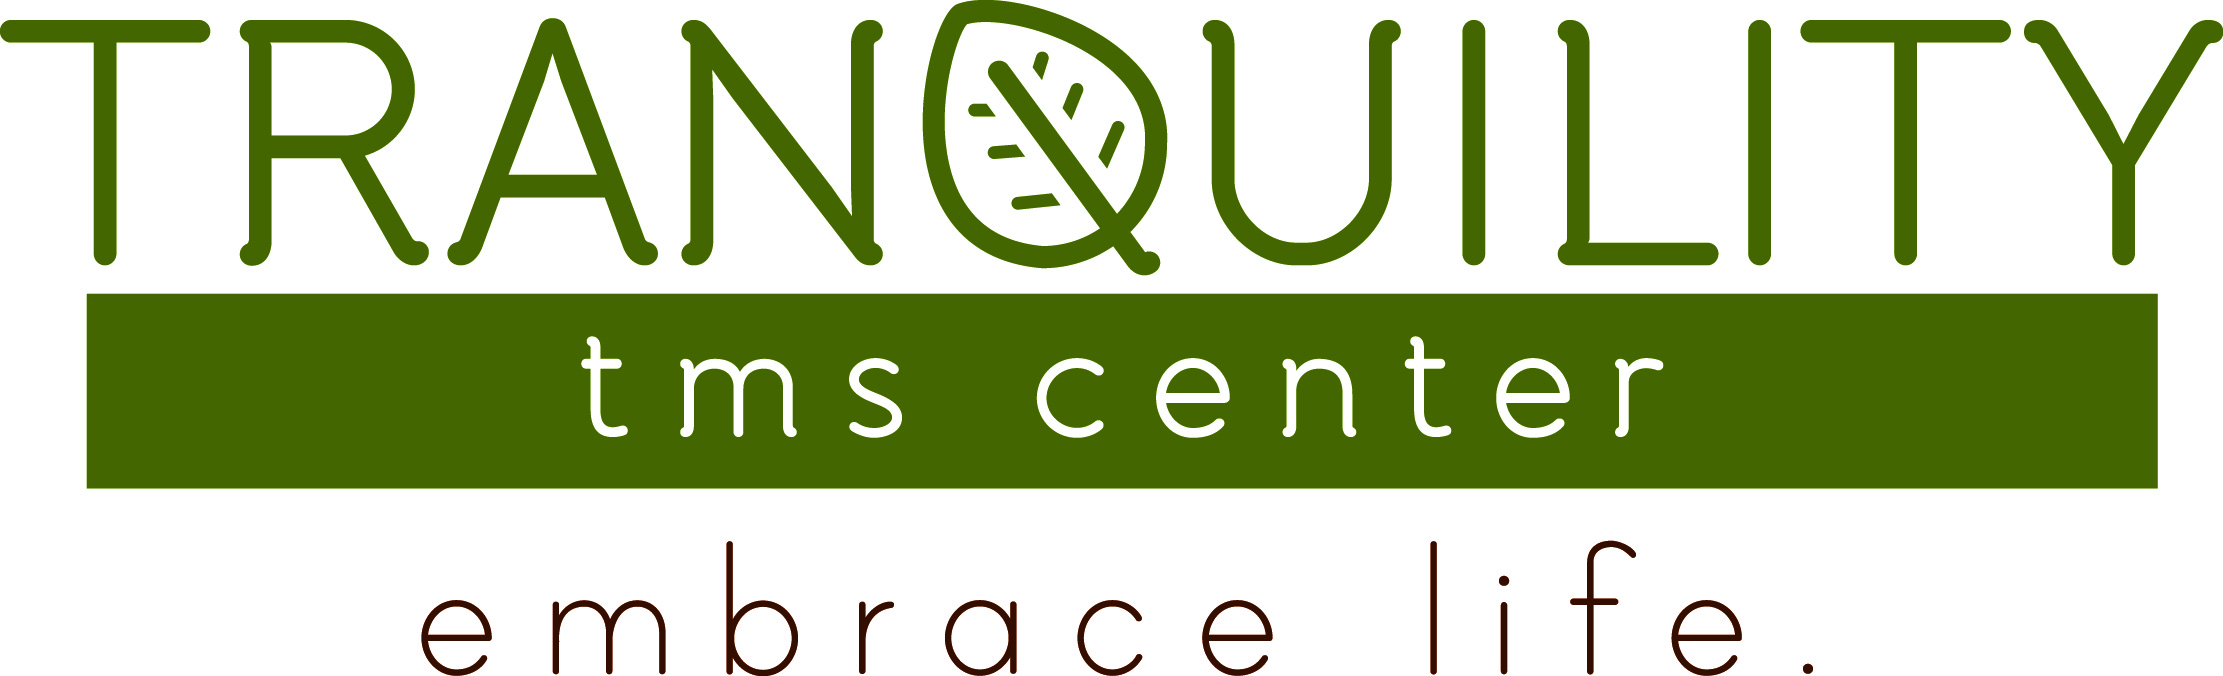 Tranquility TMS Center logo